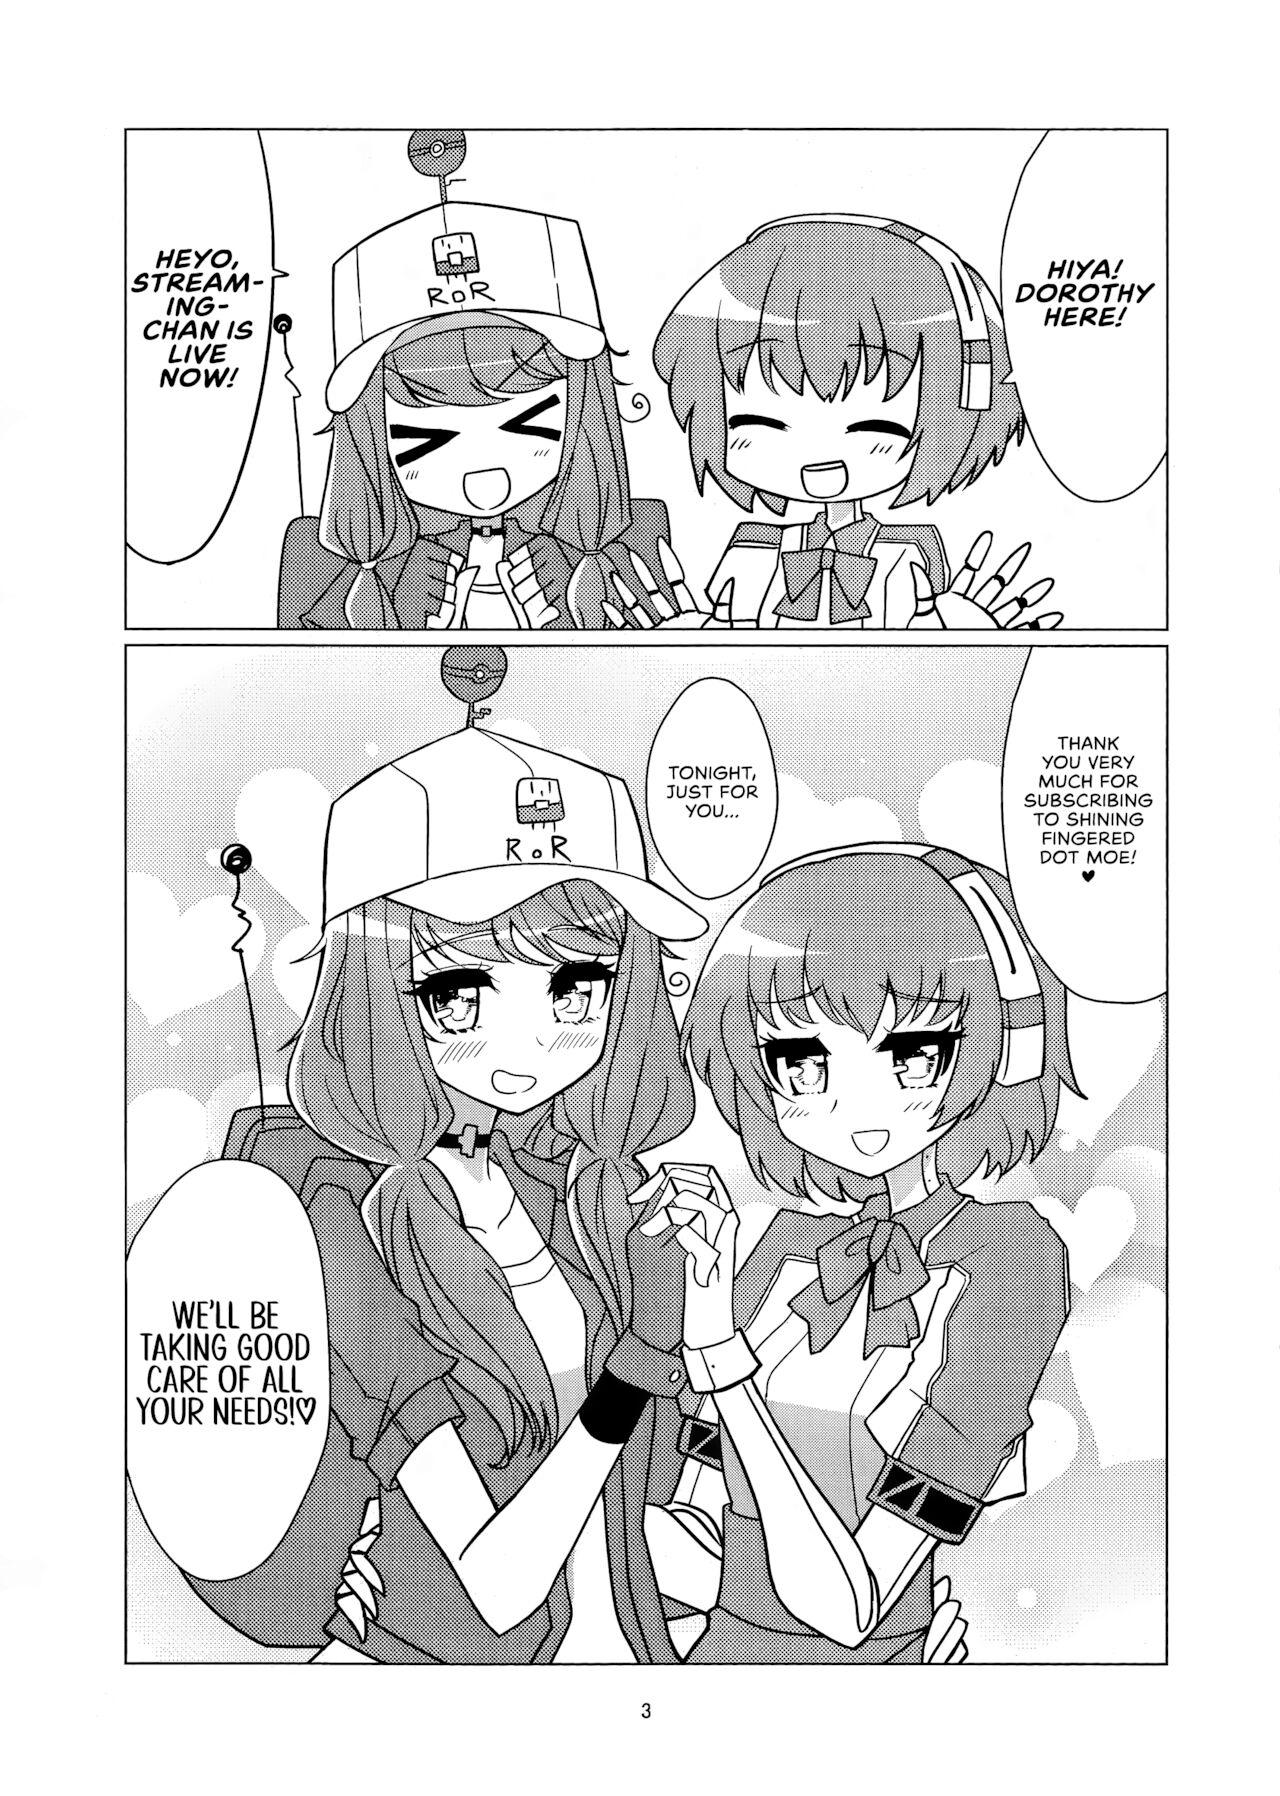 Breasts Angel's Share - Va-11 hall-a Pure 18 - Page 2